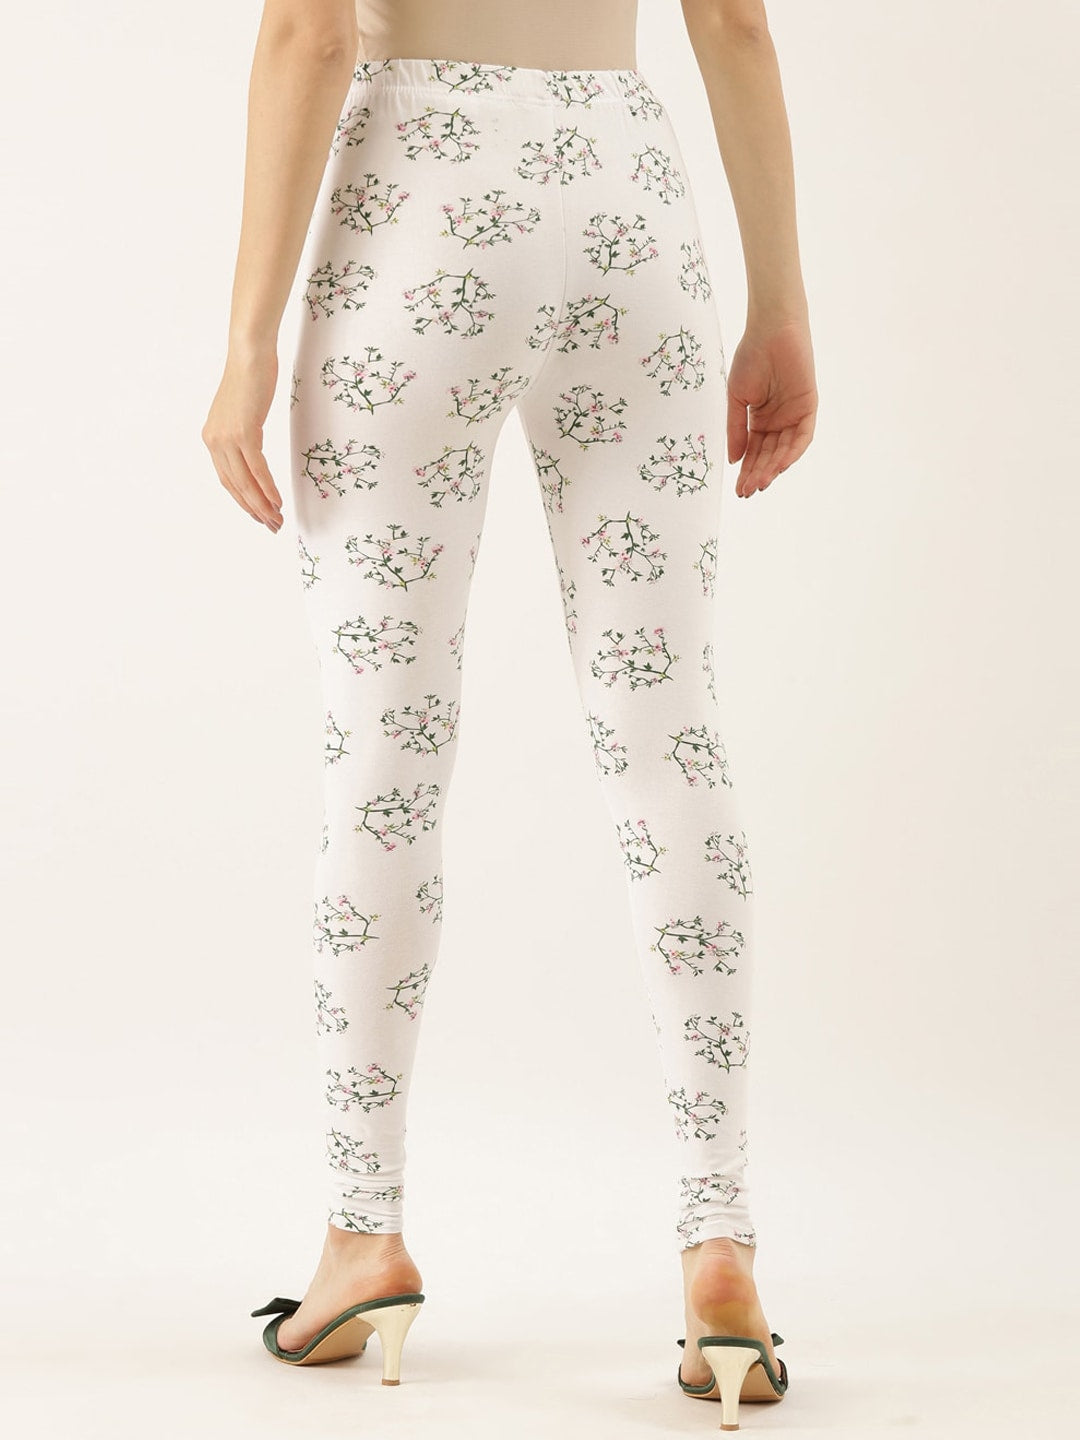 Souchii White & Green Printed Slim-Fit Ankle-Length Leggings